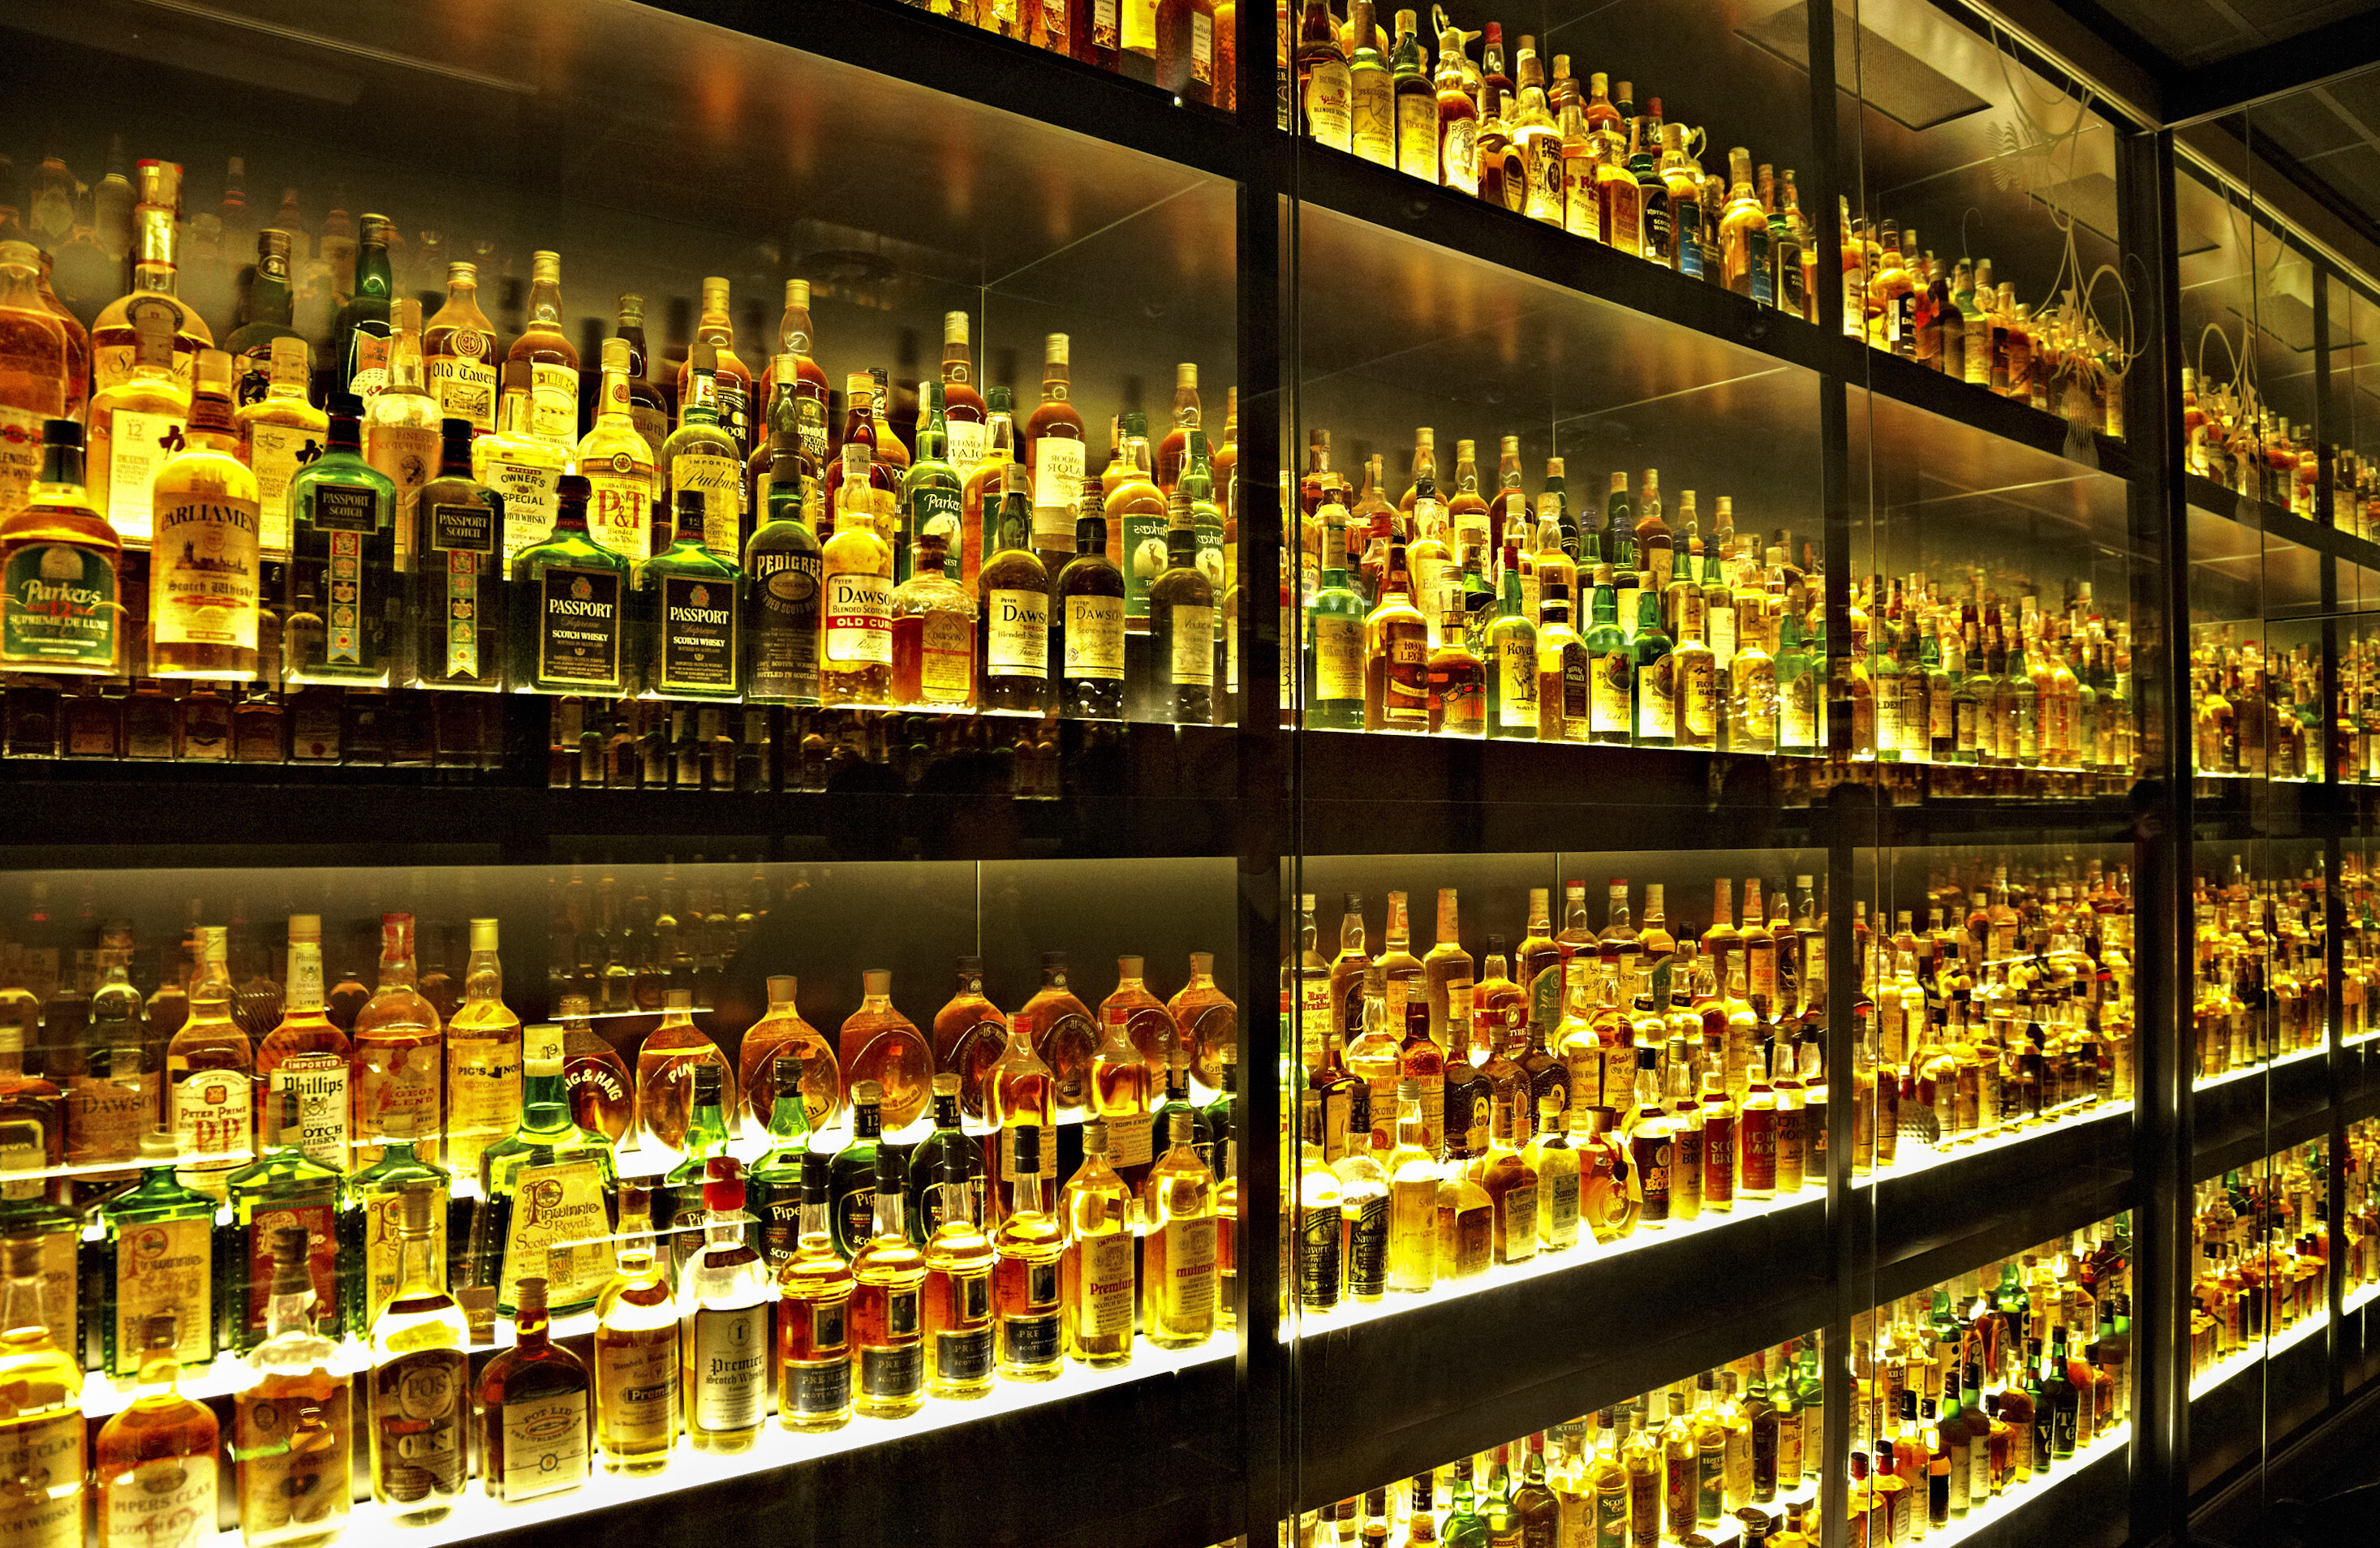 Diageo is now planning to make whisky in China, just one unusual location starting to produce its own malts. Photo: Shutterstock